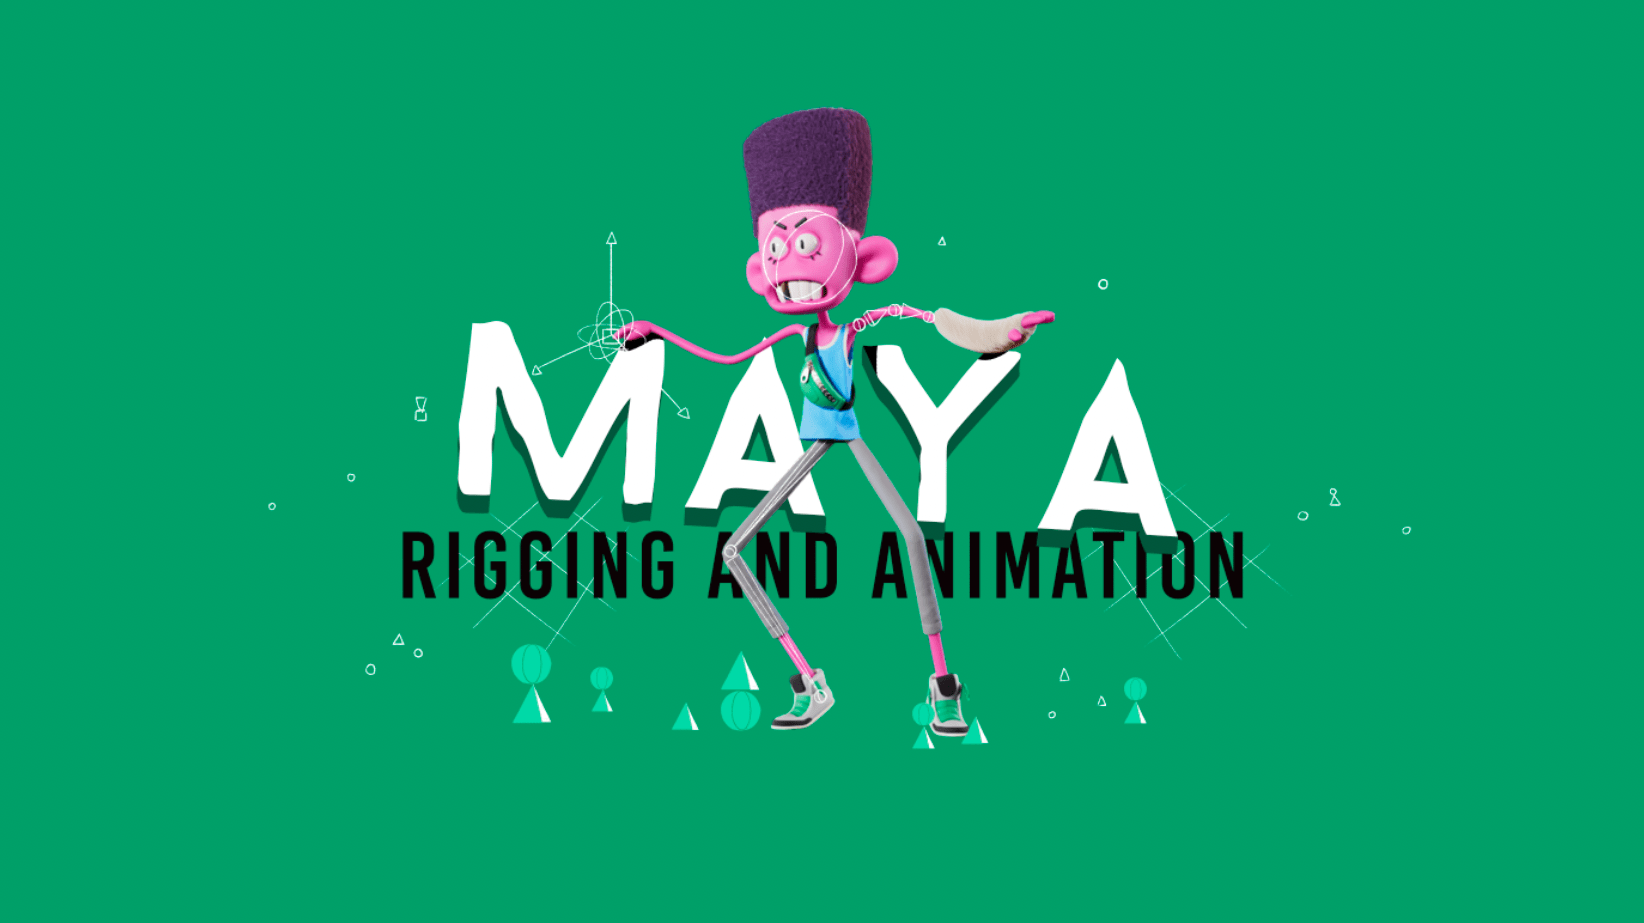 Rigging and Animation in Maya